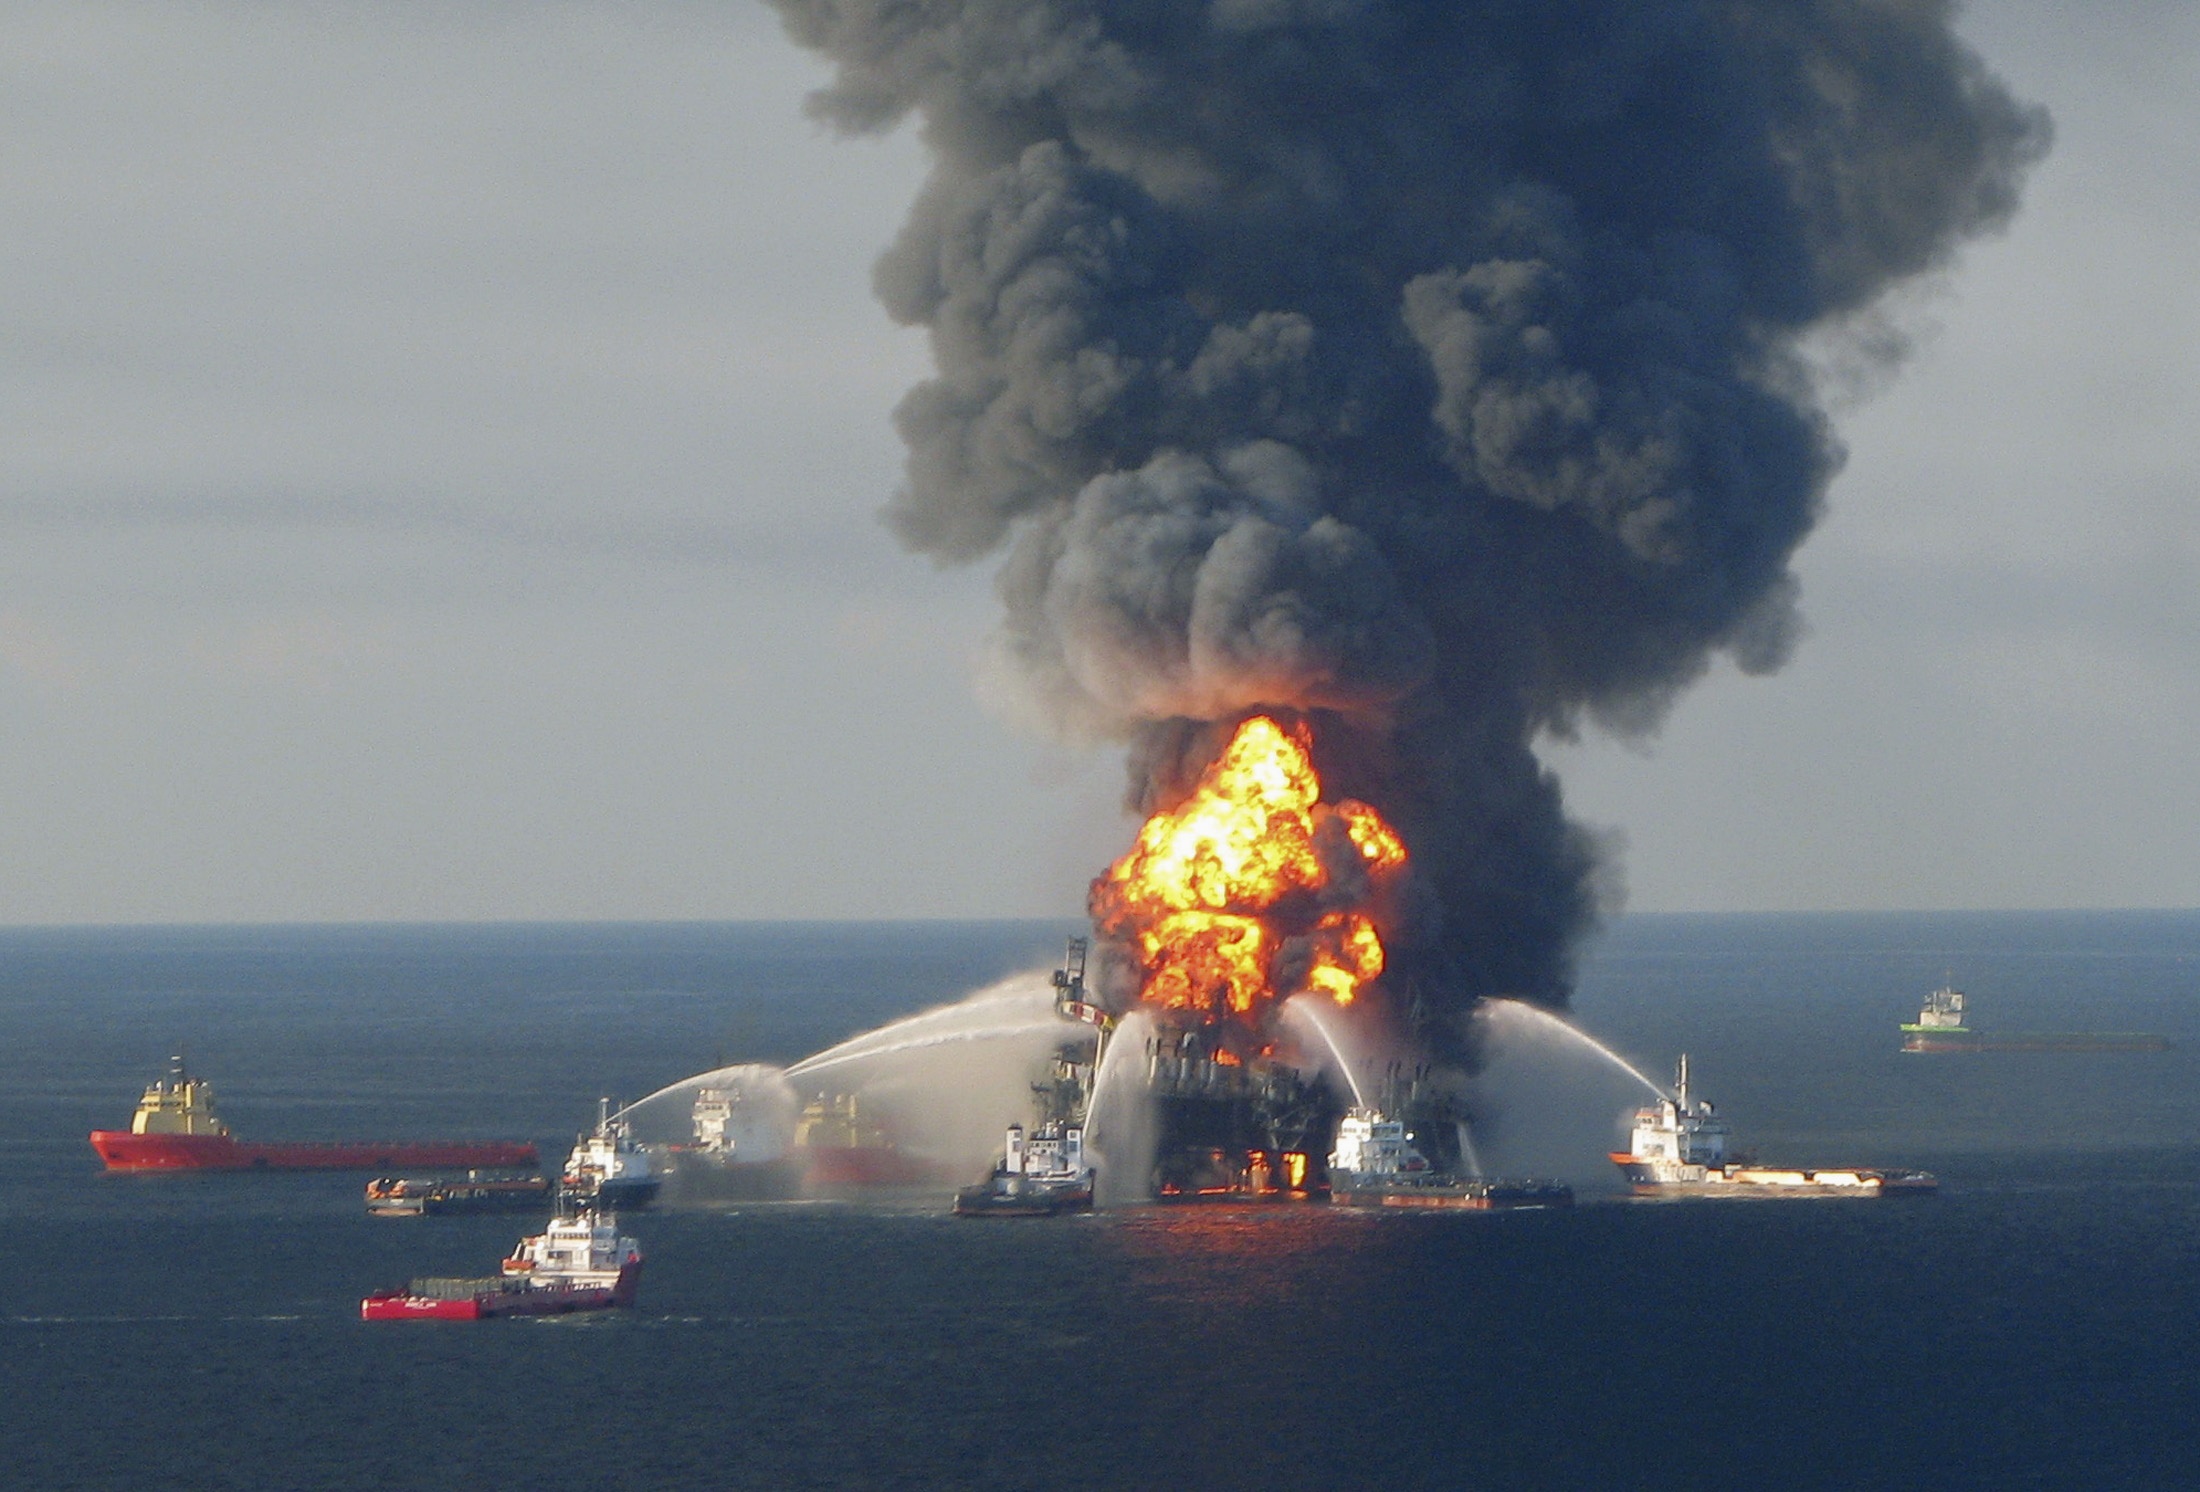 Eleven people died in the explosion of the Deepwater Horizon and the resultant oil spill was the largest in US history. Photo: Reuters